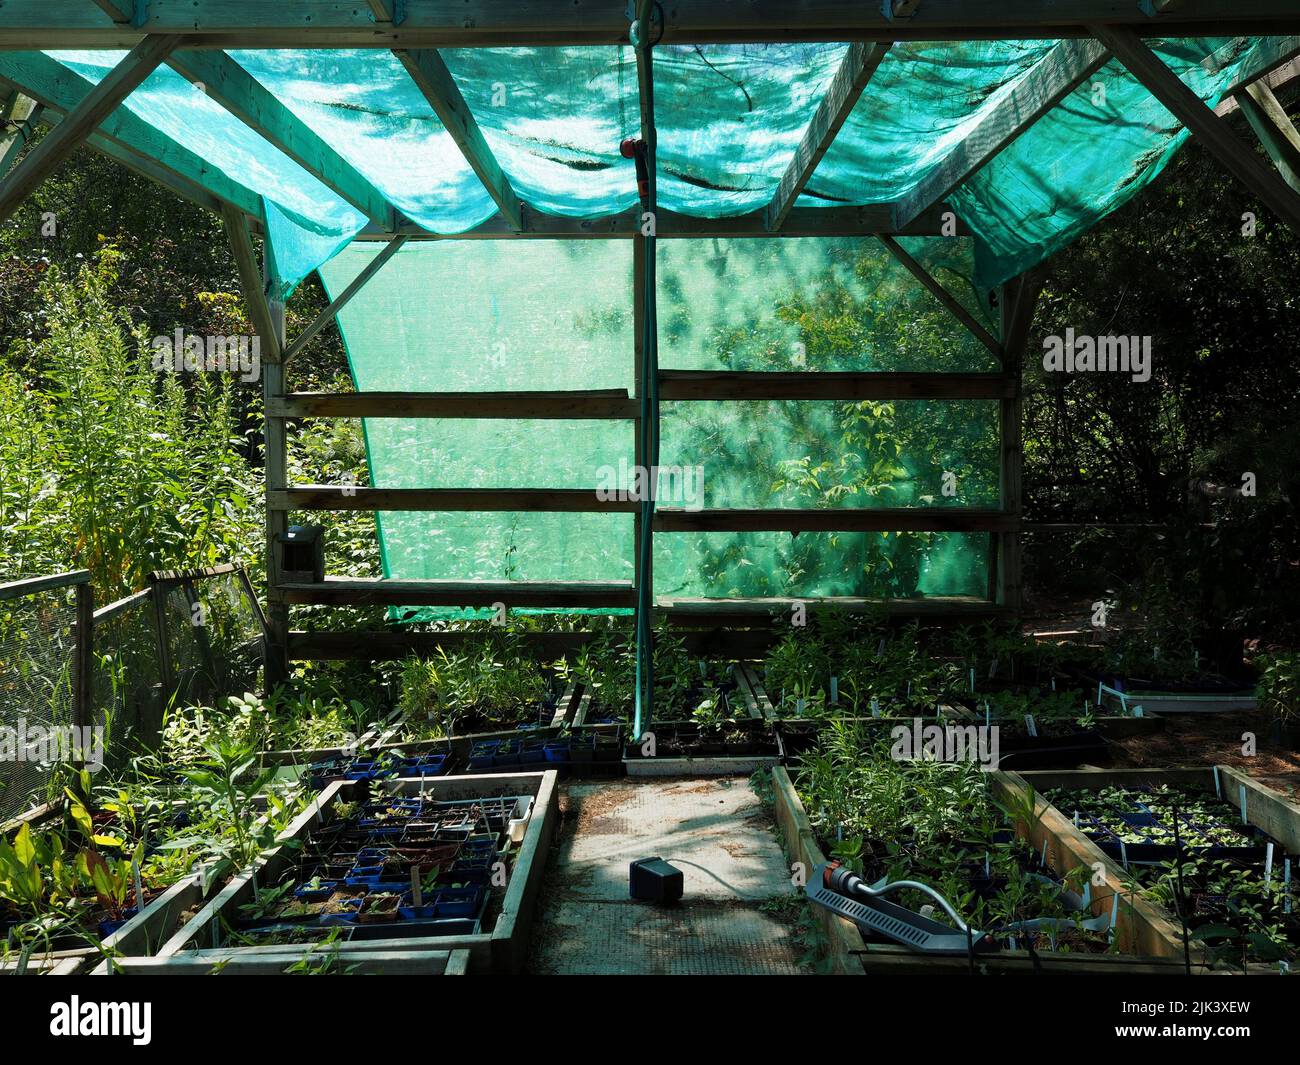 Covered in green netting and looking like it's underwater, the nursery shed at the local wildlife garden in Ottawa, Ontario, Canada. Stock Photo